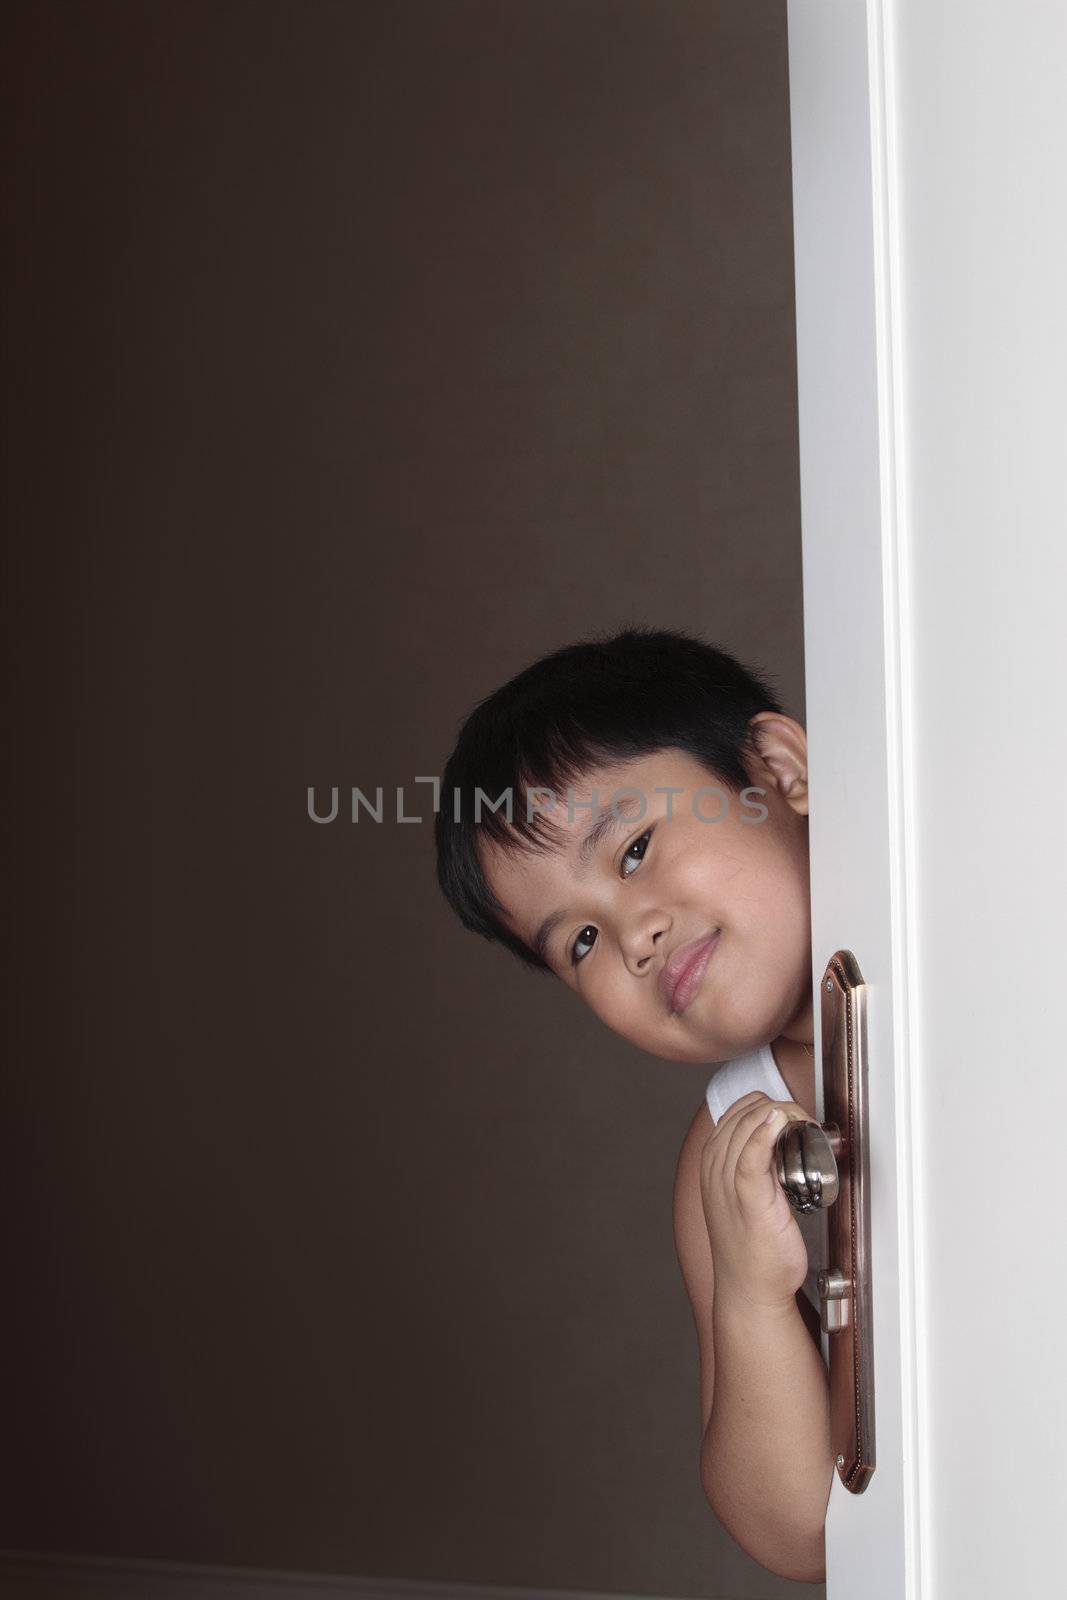 Boy peeping out from behind door  by sacatani